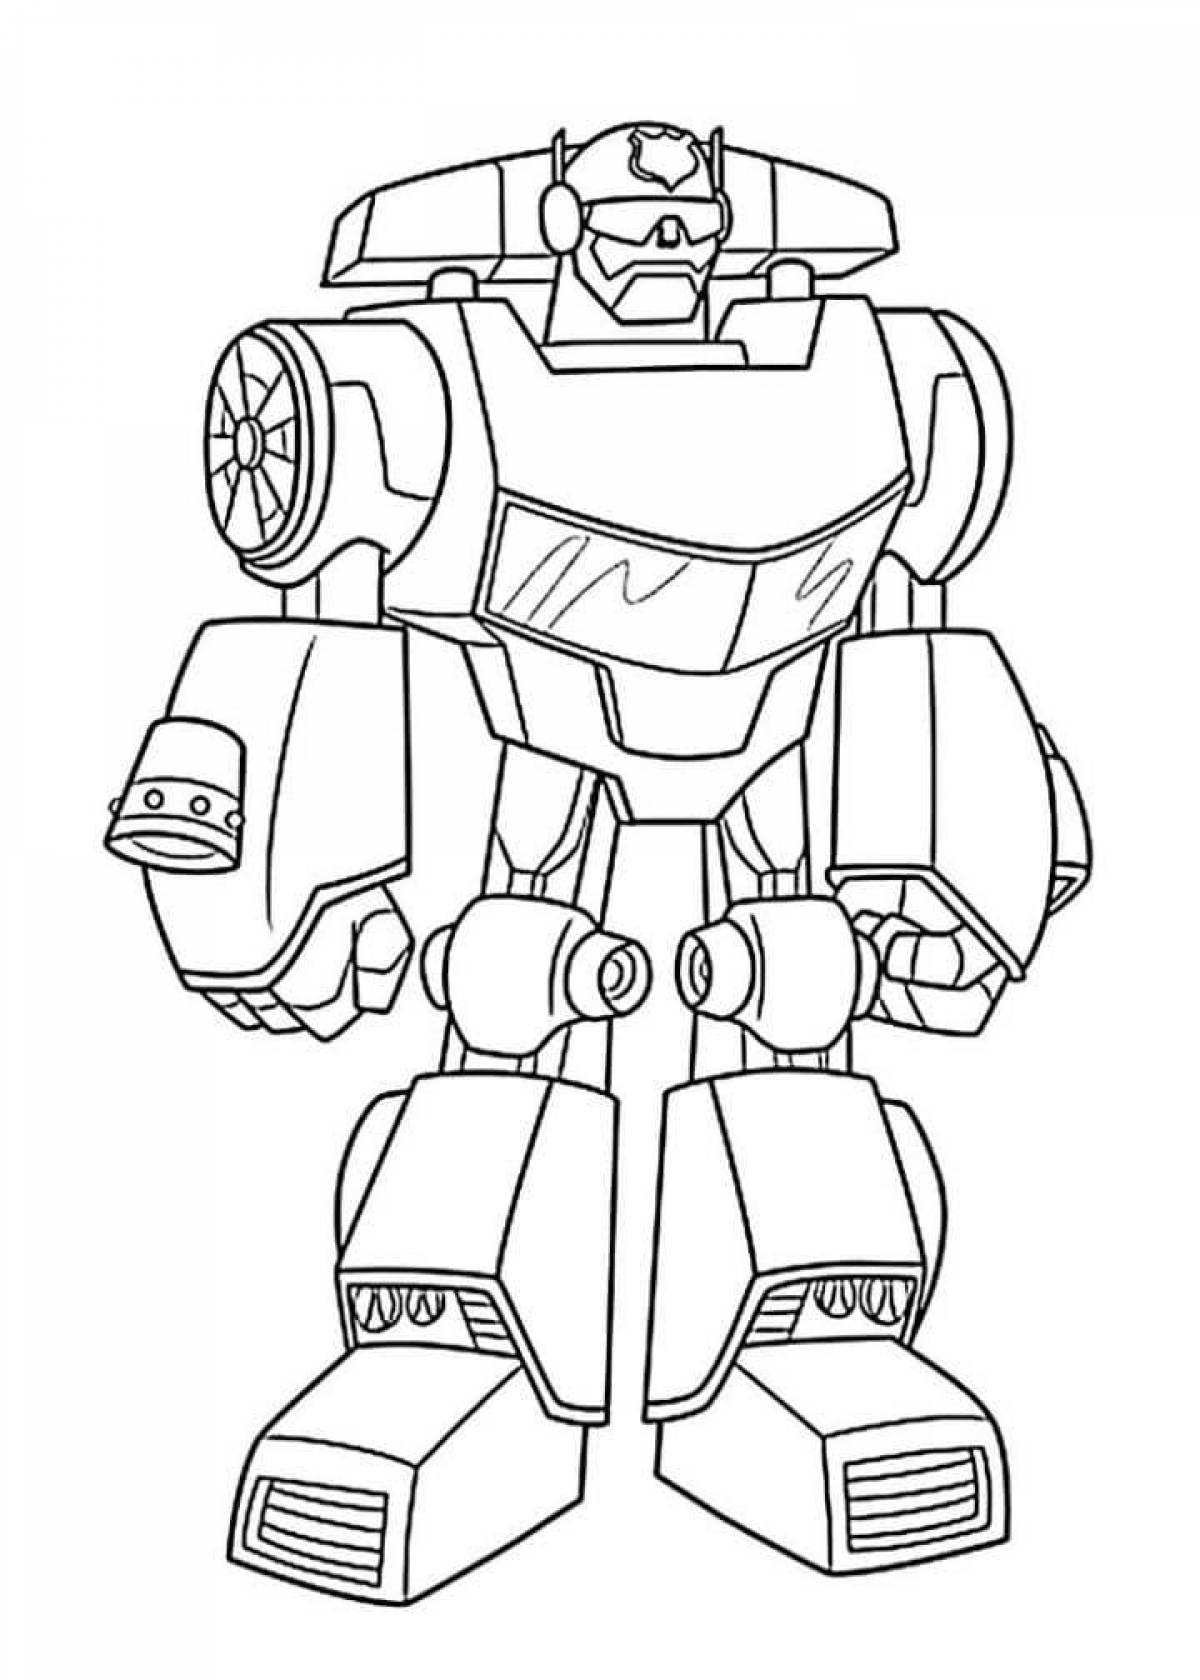 Adorable robot coloring book for 5-6 year olds